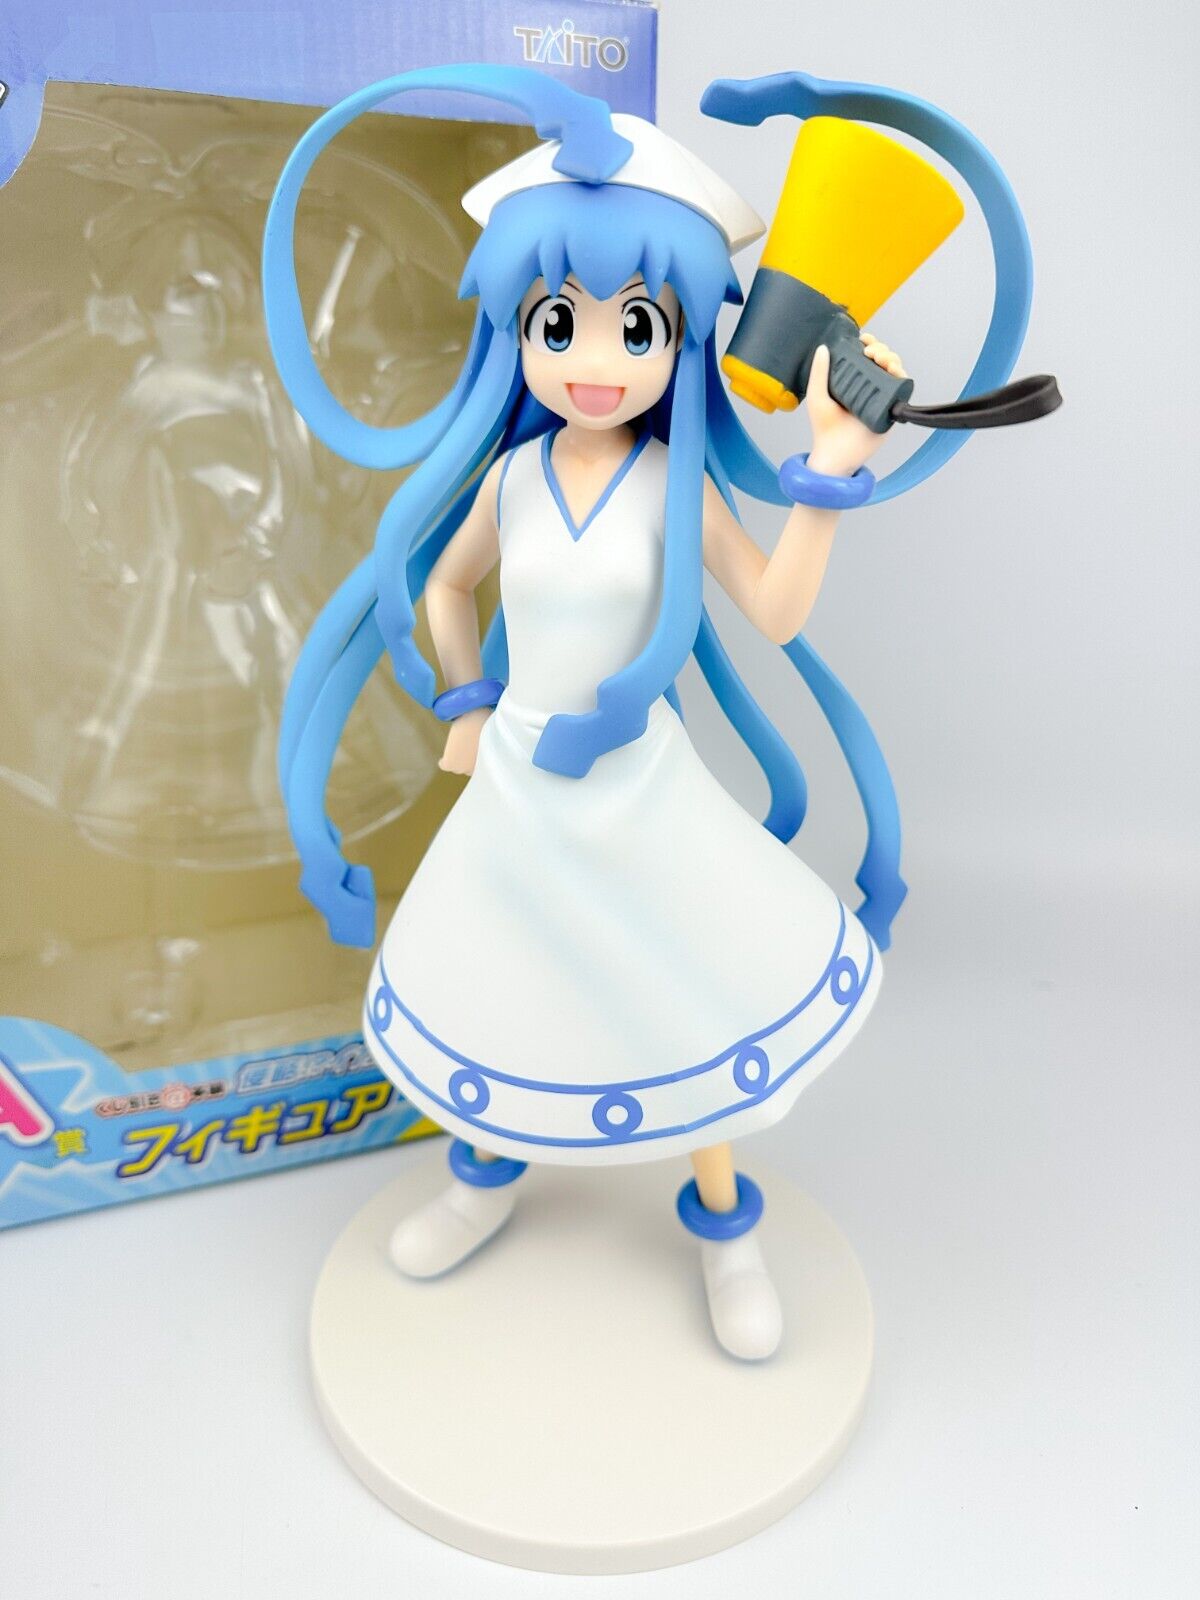 Squid Girl Figure Taito Kuji A Prize Ika Musume 25cm from Japan Anime